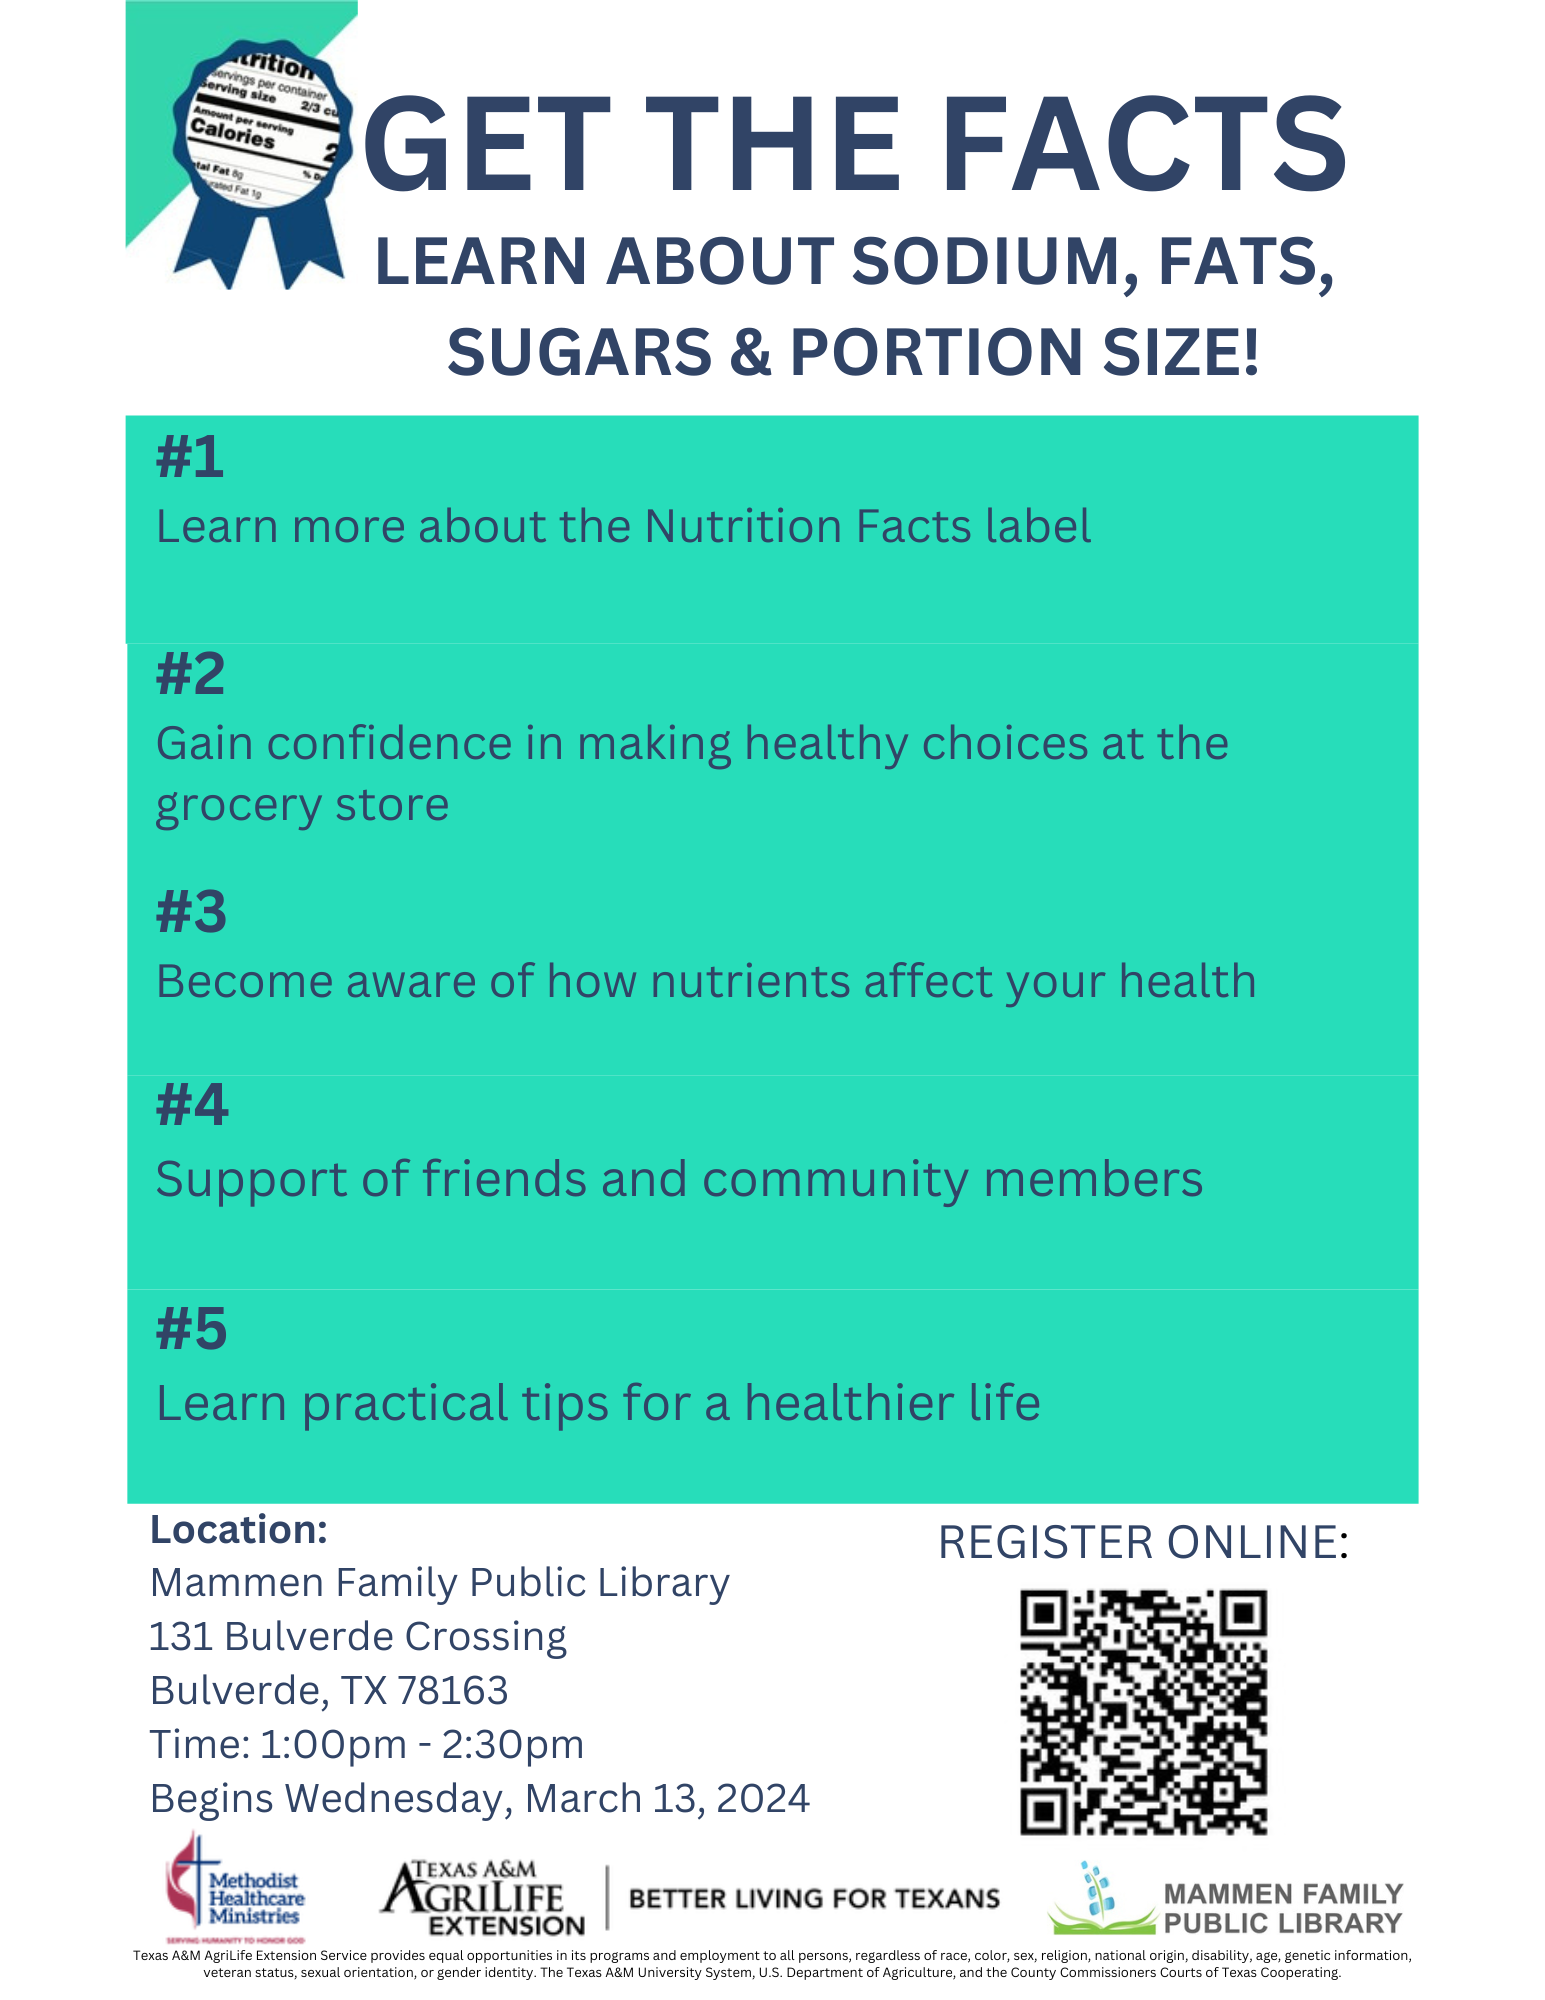 Schedule for Get the Facts nutrition series